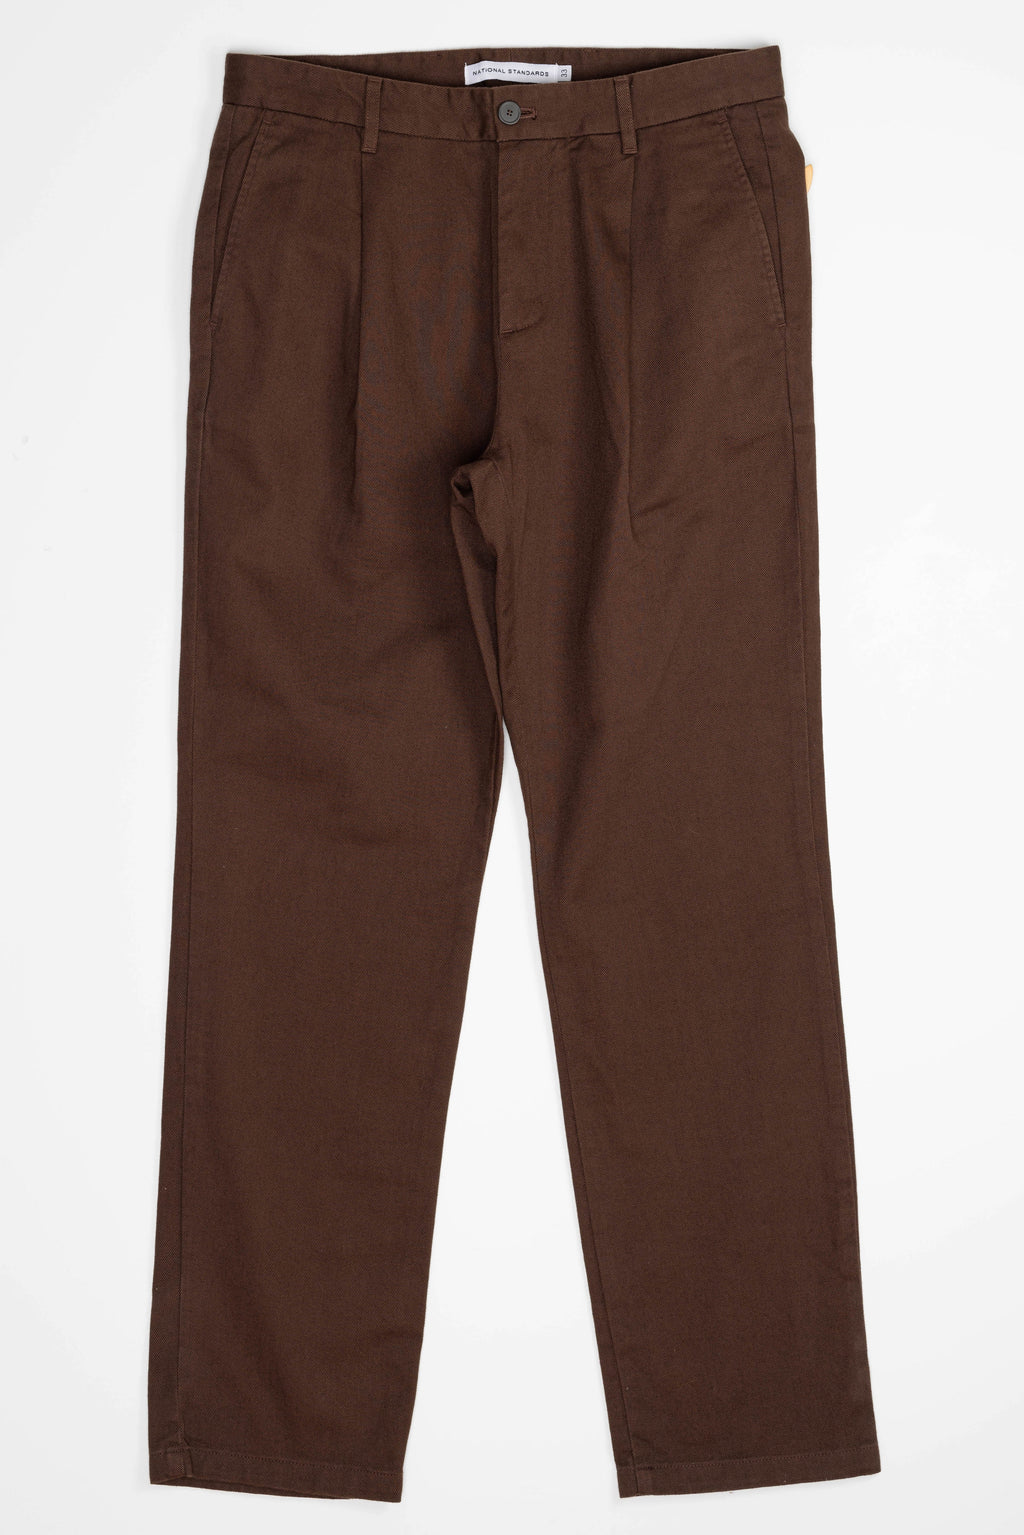 Pleated Chino Classic Tumbler Drill in Brown 06